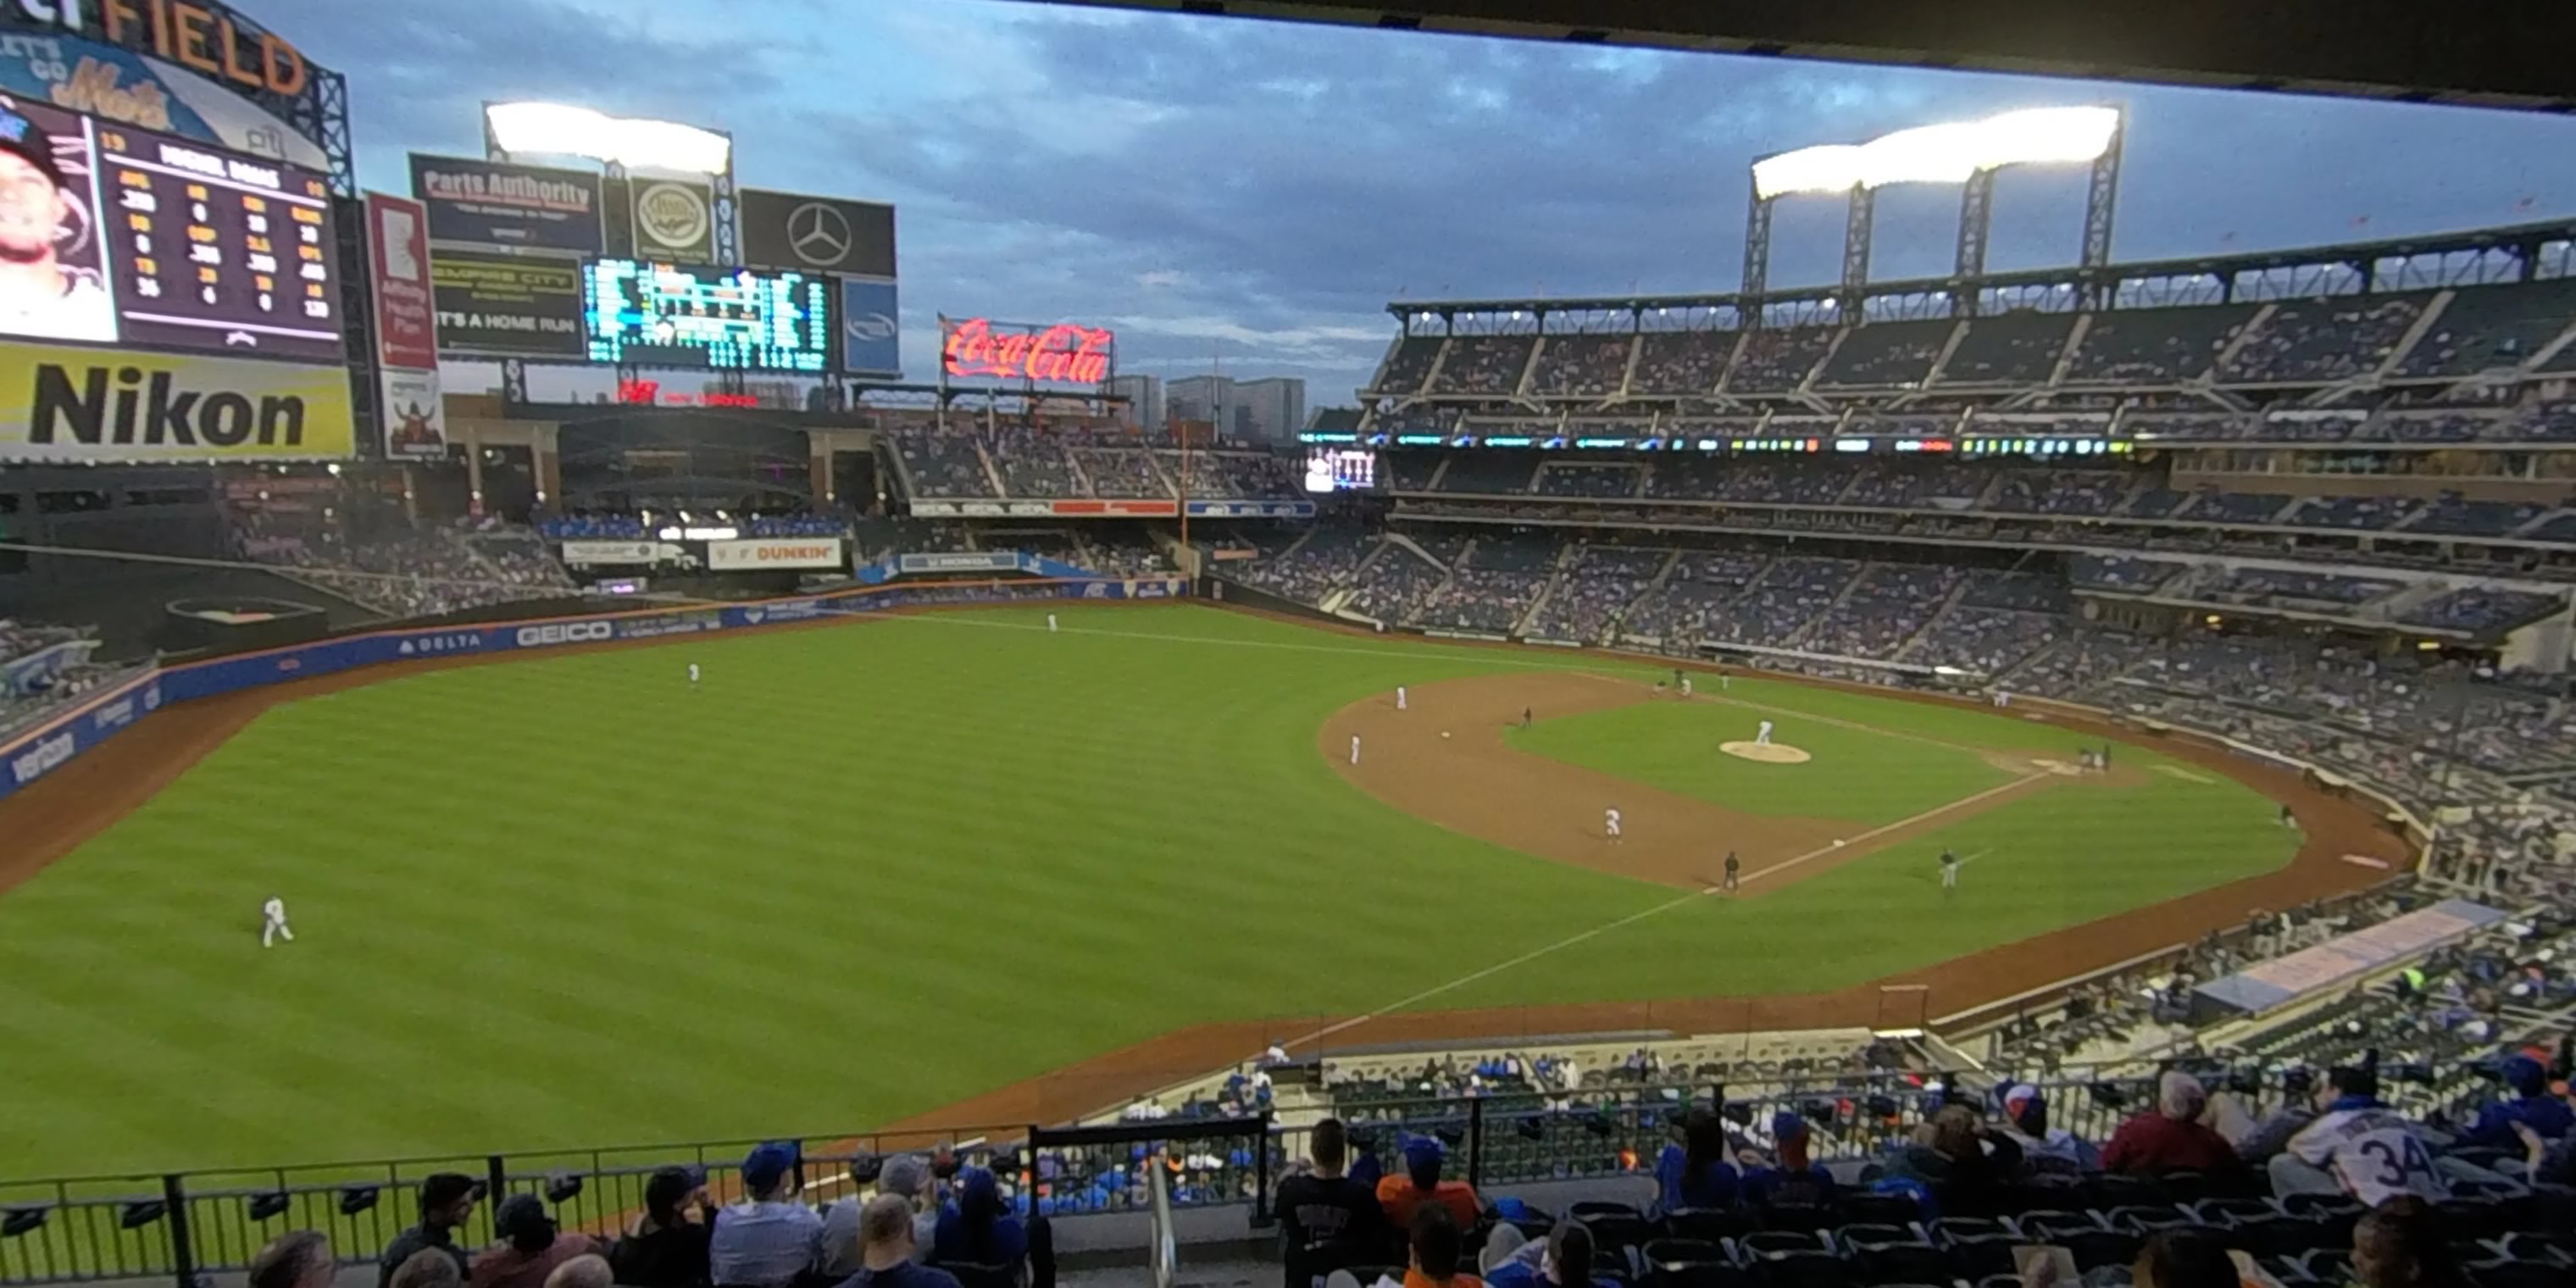 section 331 panoramic seat view  - citi field